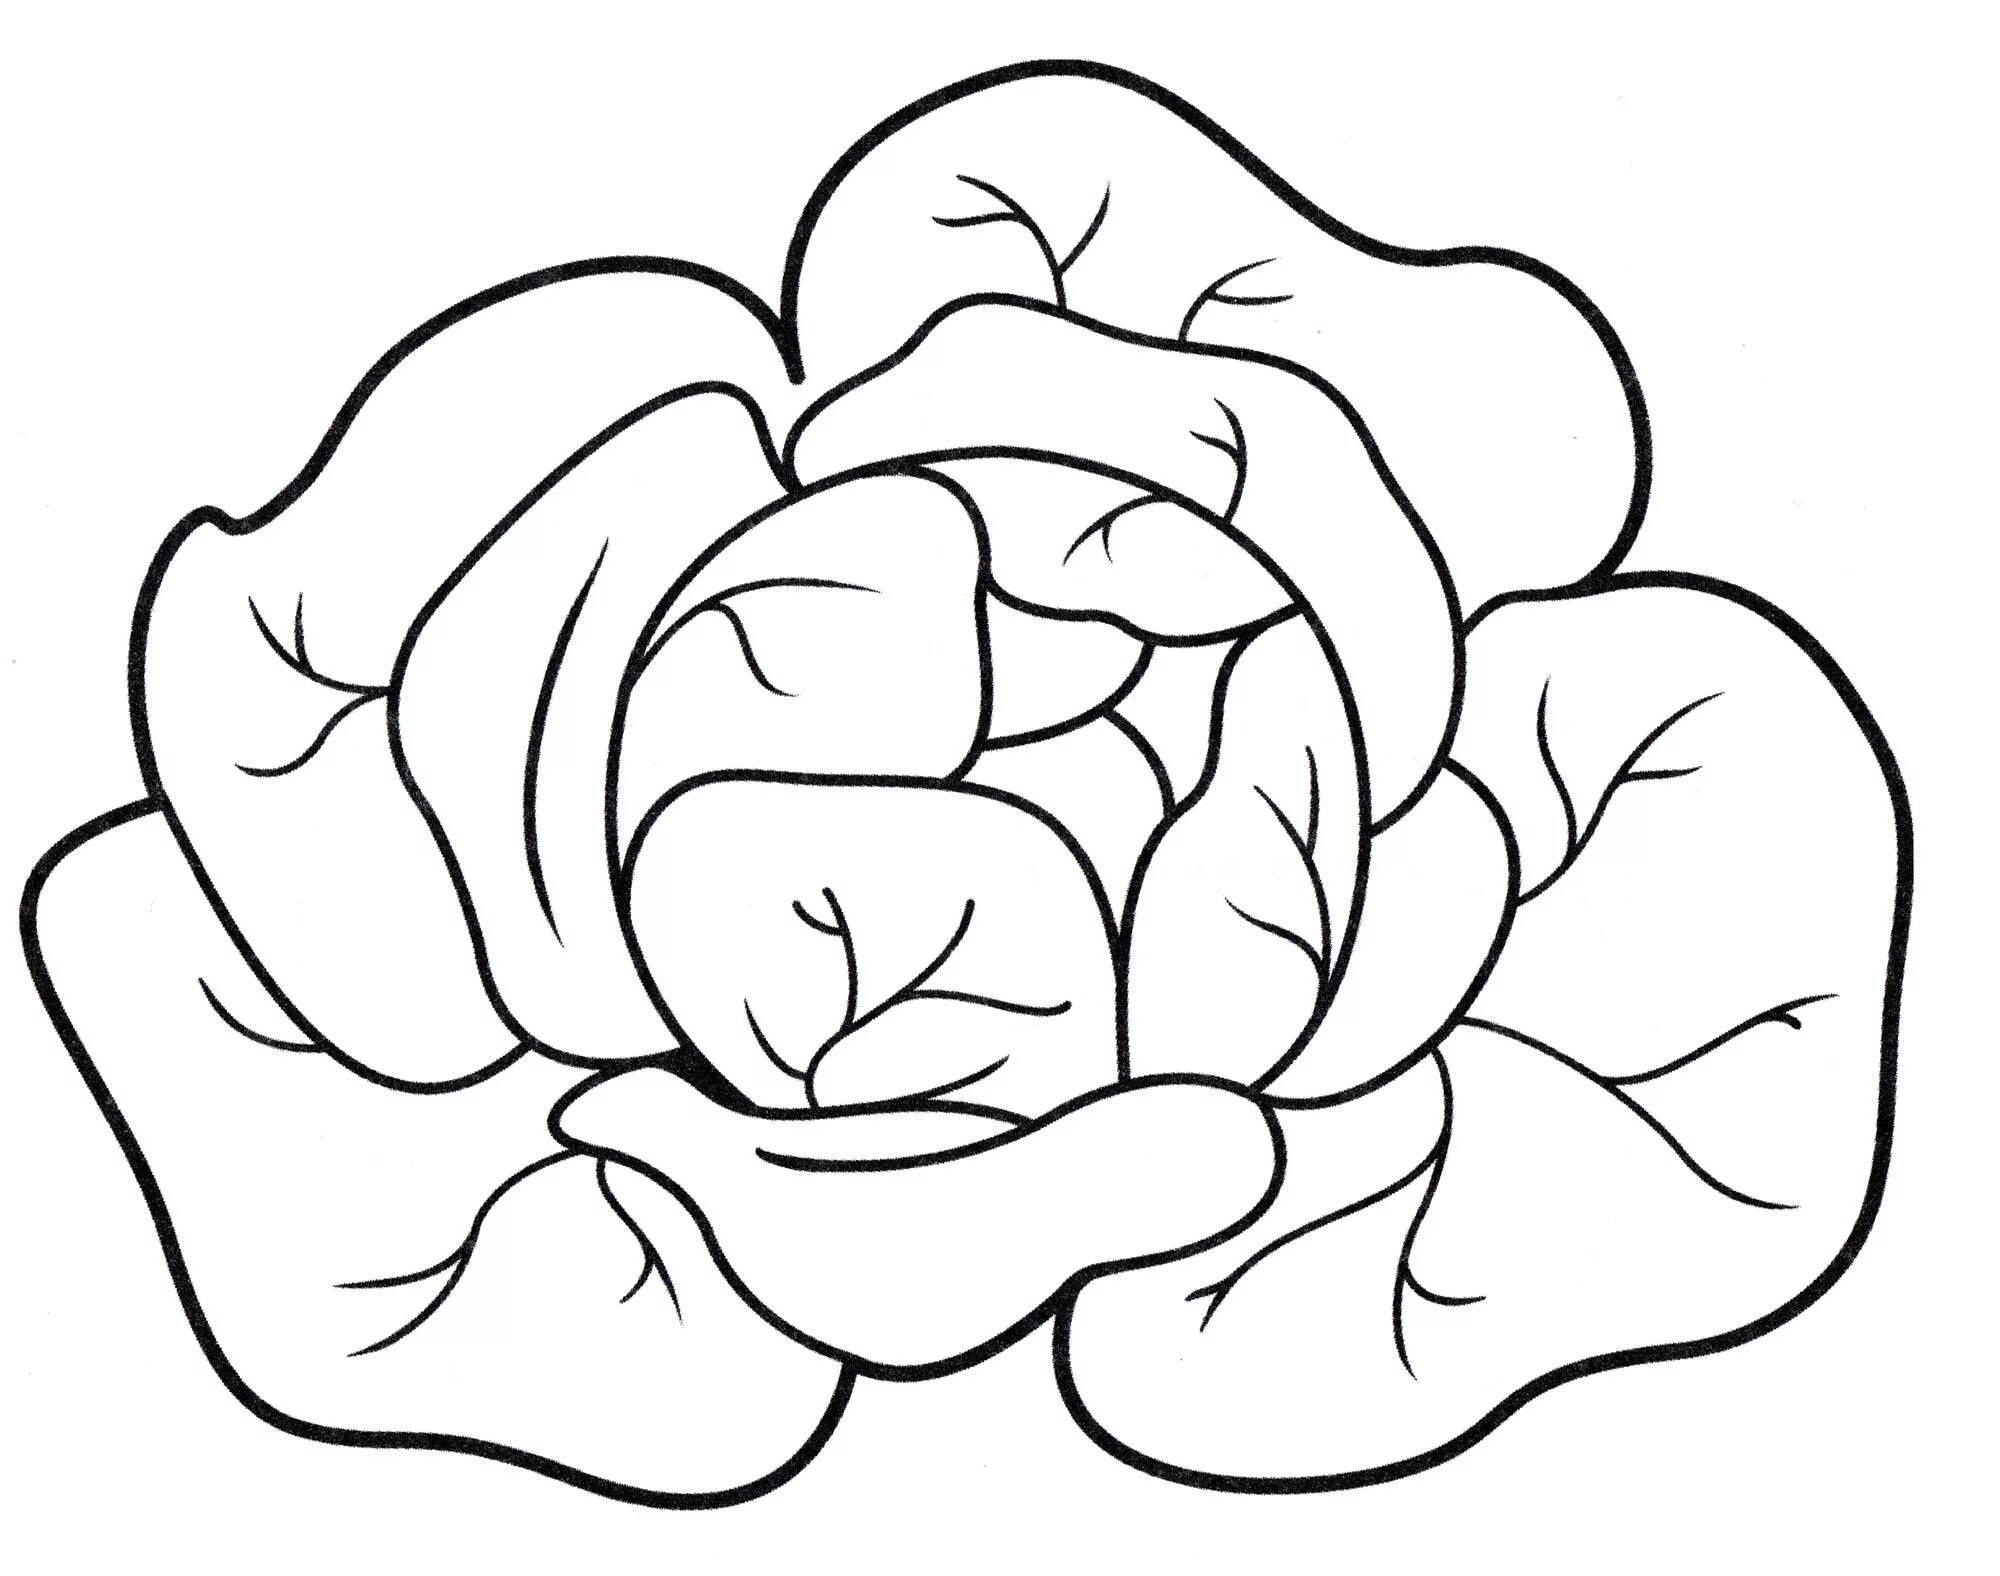 Colouring serene cabbage for children 3-4 years old